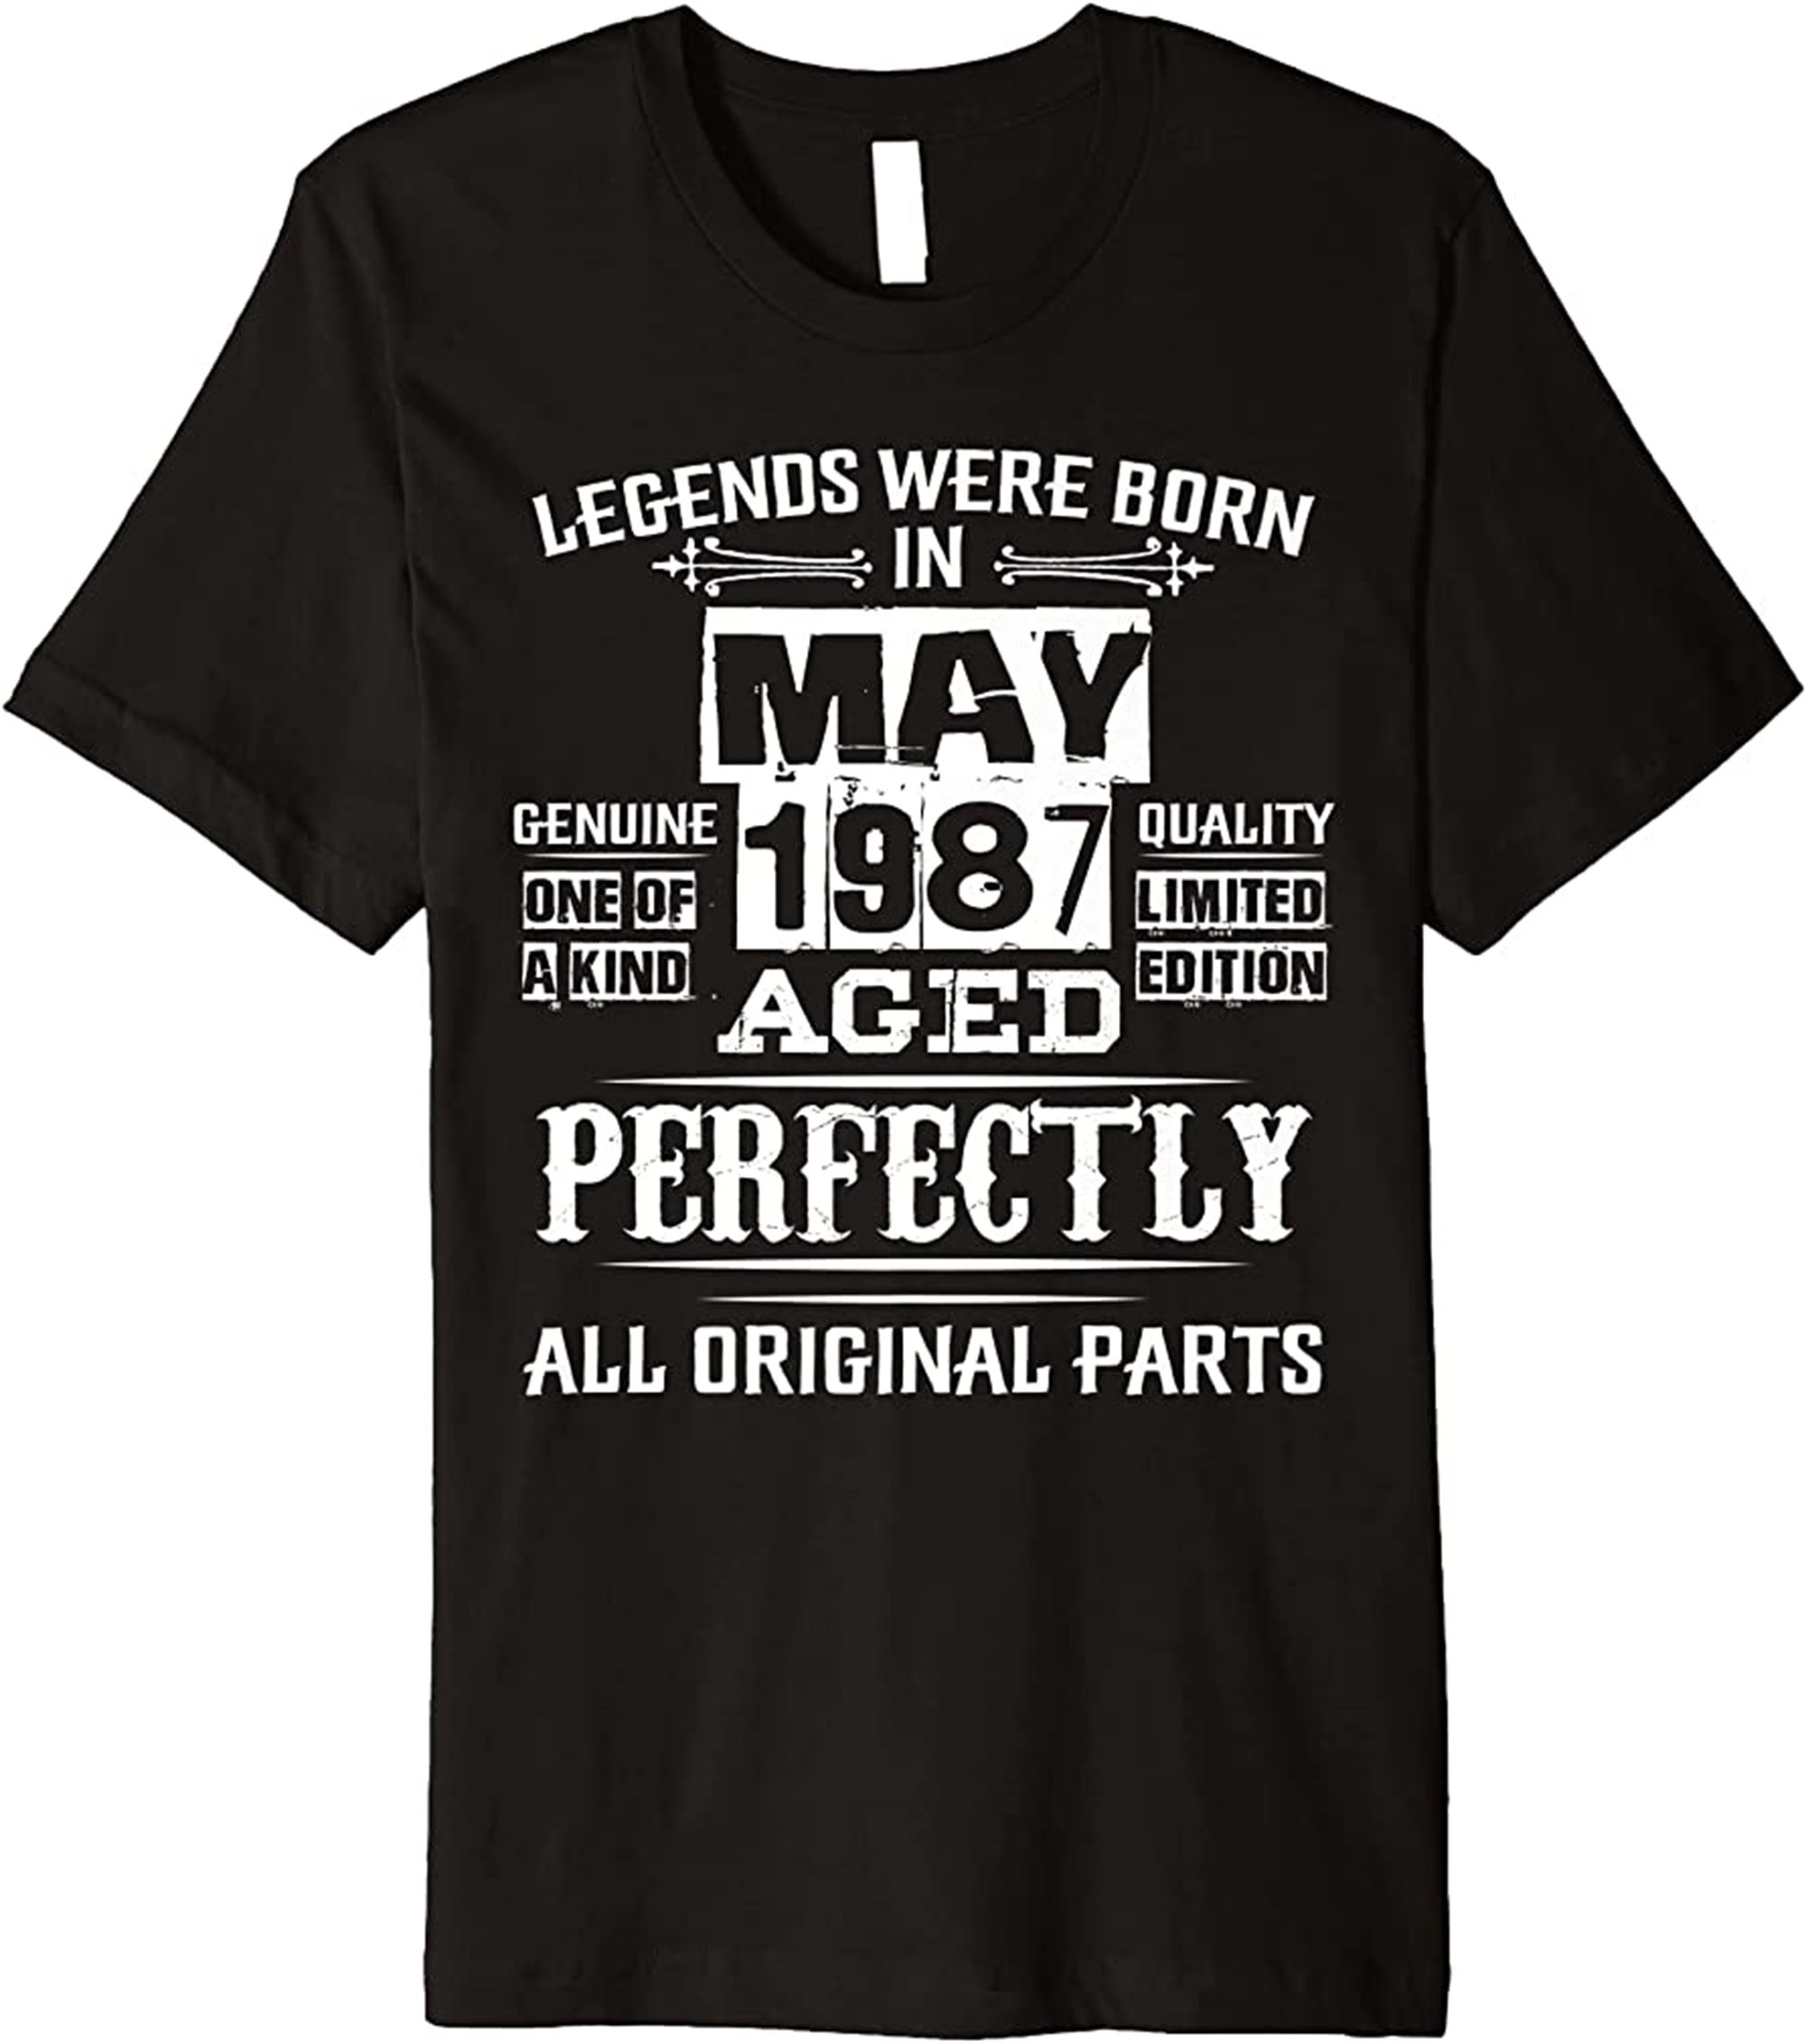 35th Birthday Gift For Legends Born May 1987 35 Years Old Premium T-shirt Full Size Up To 5xl